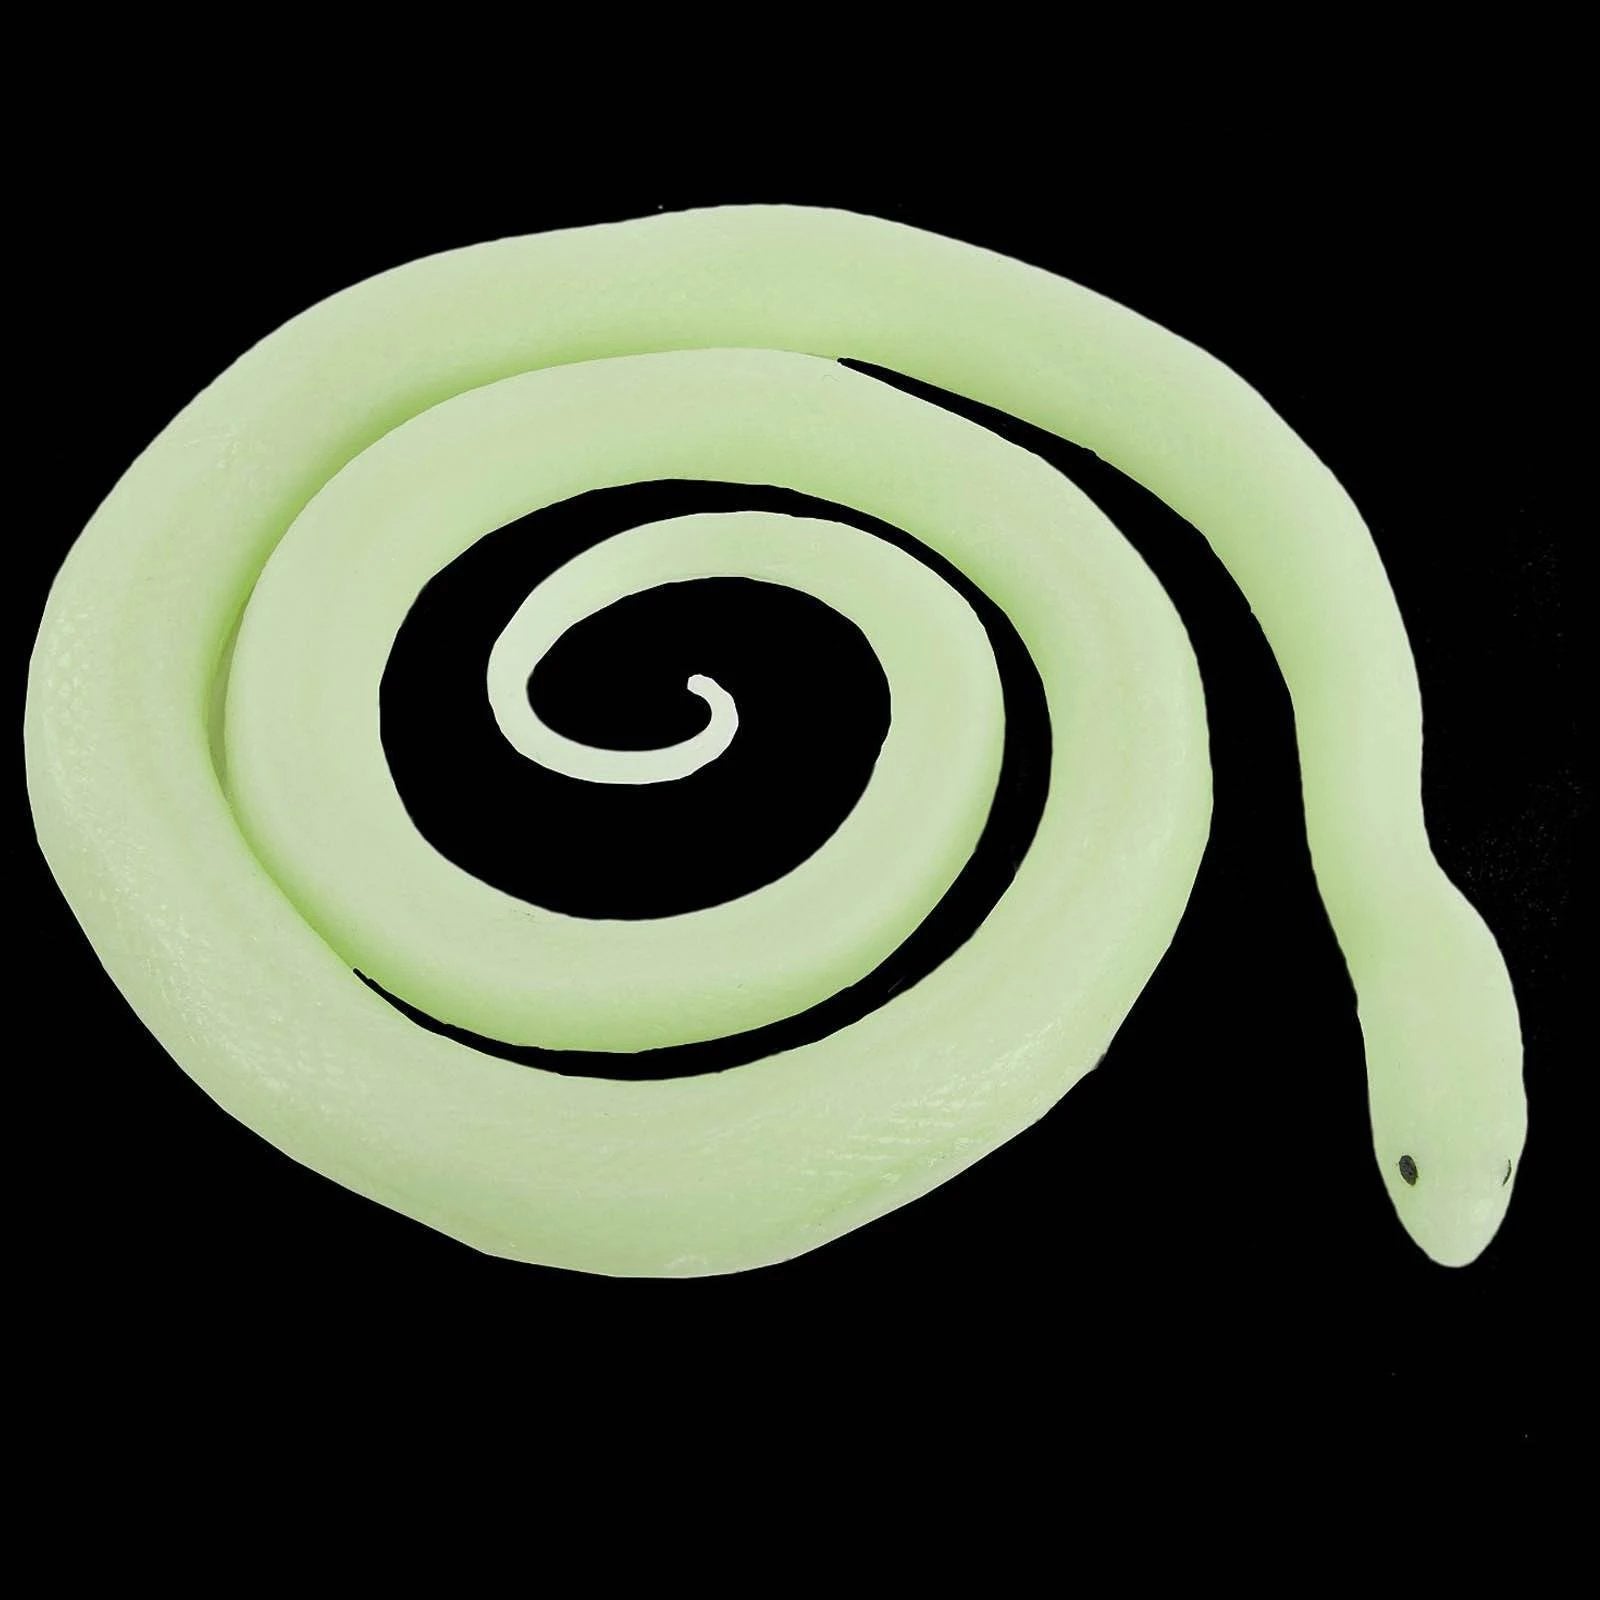 Glow In Dark Snake, The Glow in the Dark Snake is not your ordinary toy. This captivating fidget toy is perfect for kids and even adults who love snakes. With its enchanting glow, it adds a whole new level of fun and excitement to playtime.Made with high-quality materials, the Glow in the Dark Snake is both durable and safe to use. Its tactile surface provides a satisfying texture, making it perfect for sensory play. Plus, its flexible and stretchable design allows for endless possibilities of twisting and 